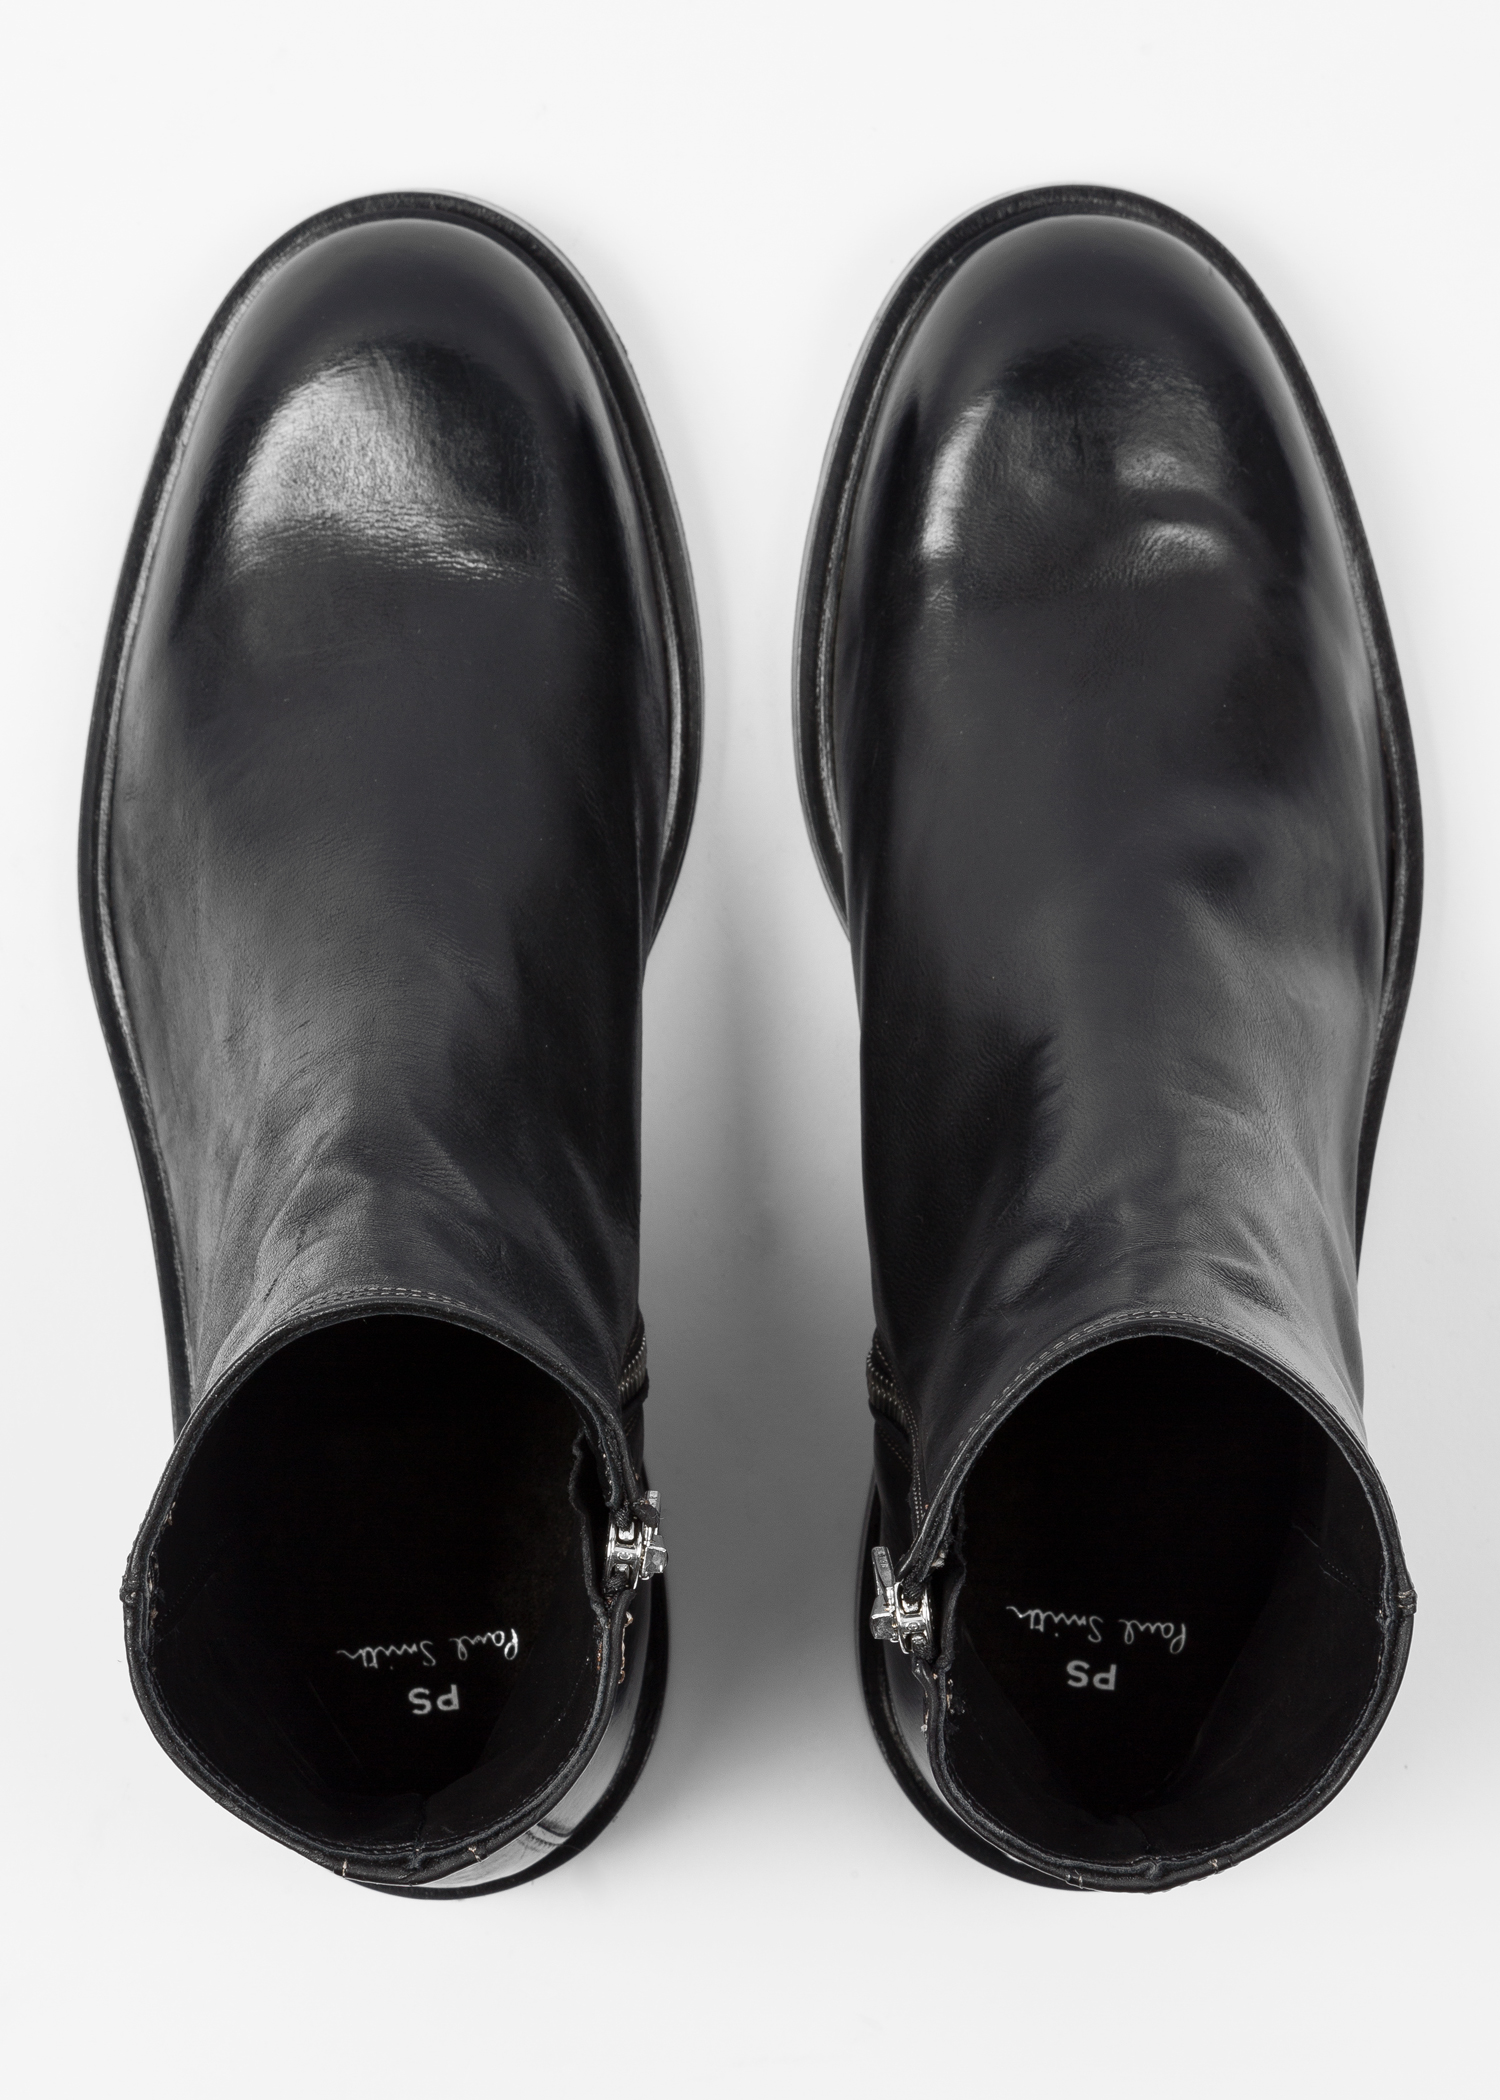 Top Down View - Men's Black Leather 'Billy' Zip Boots Paul Smith 